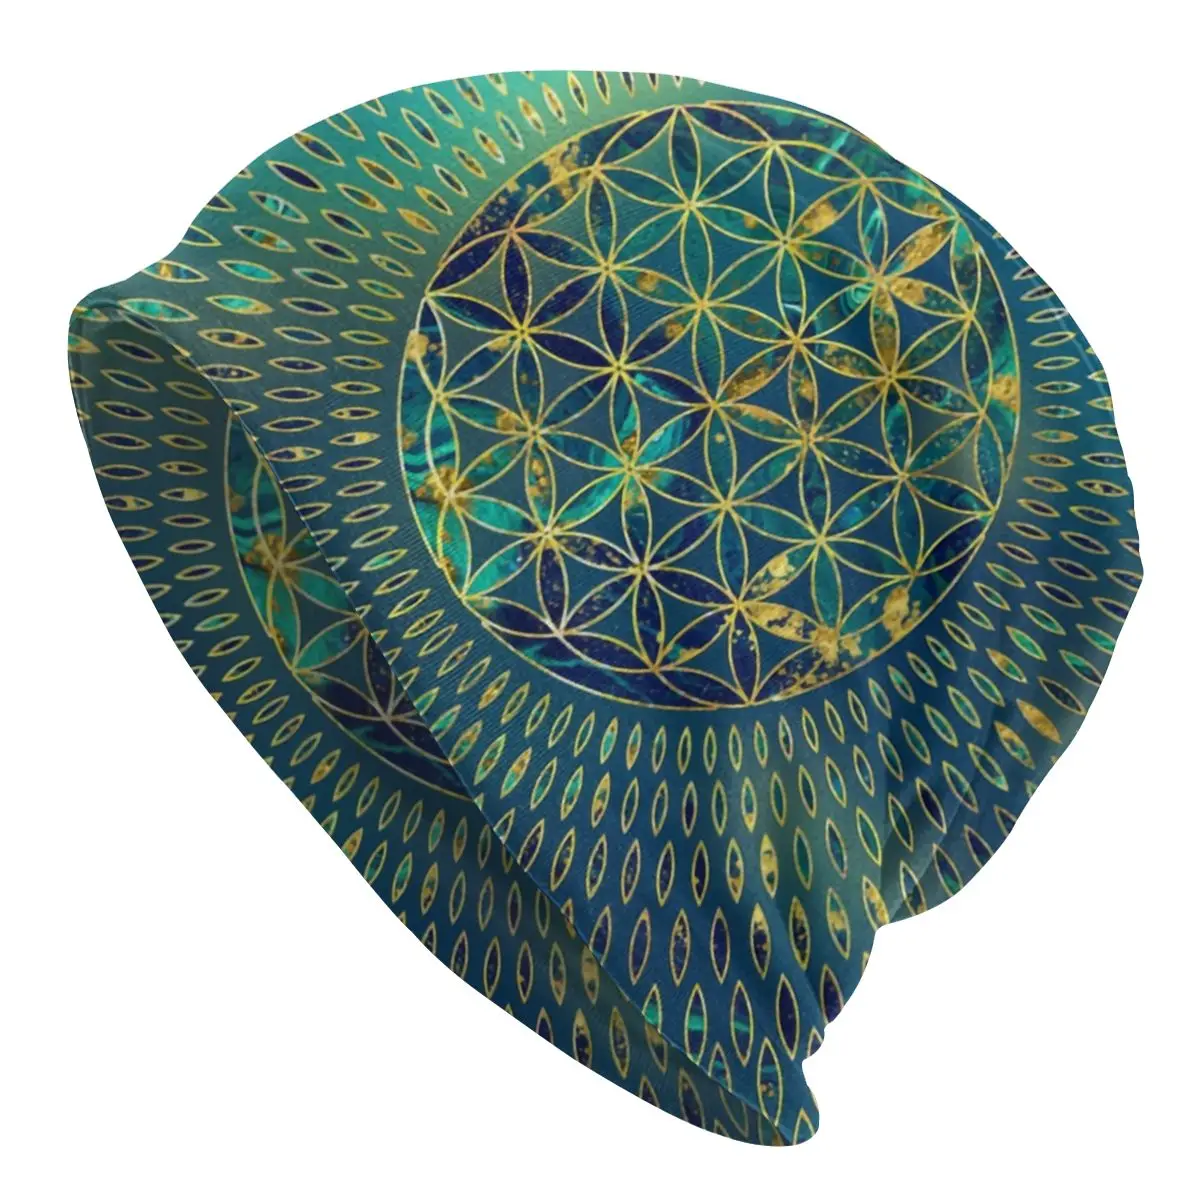 Flower Of Life Marble And Gold Beanies Caps For Men Women Unisex Fashion Winter Warm Knit Hat Adult Mandala Bonnet Hats 1